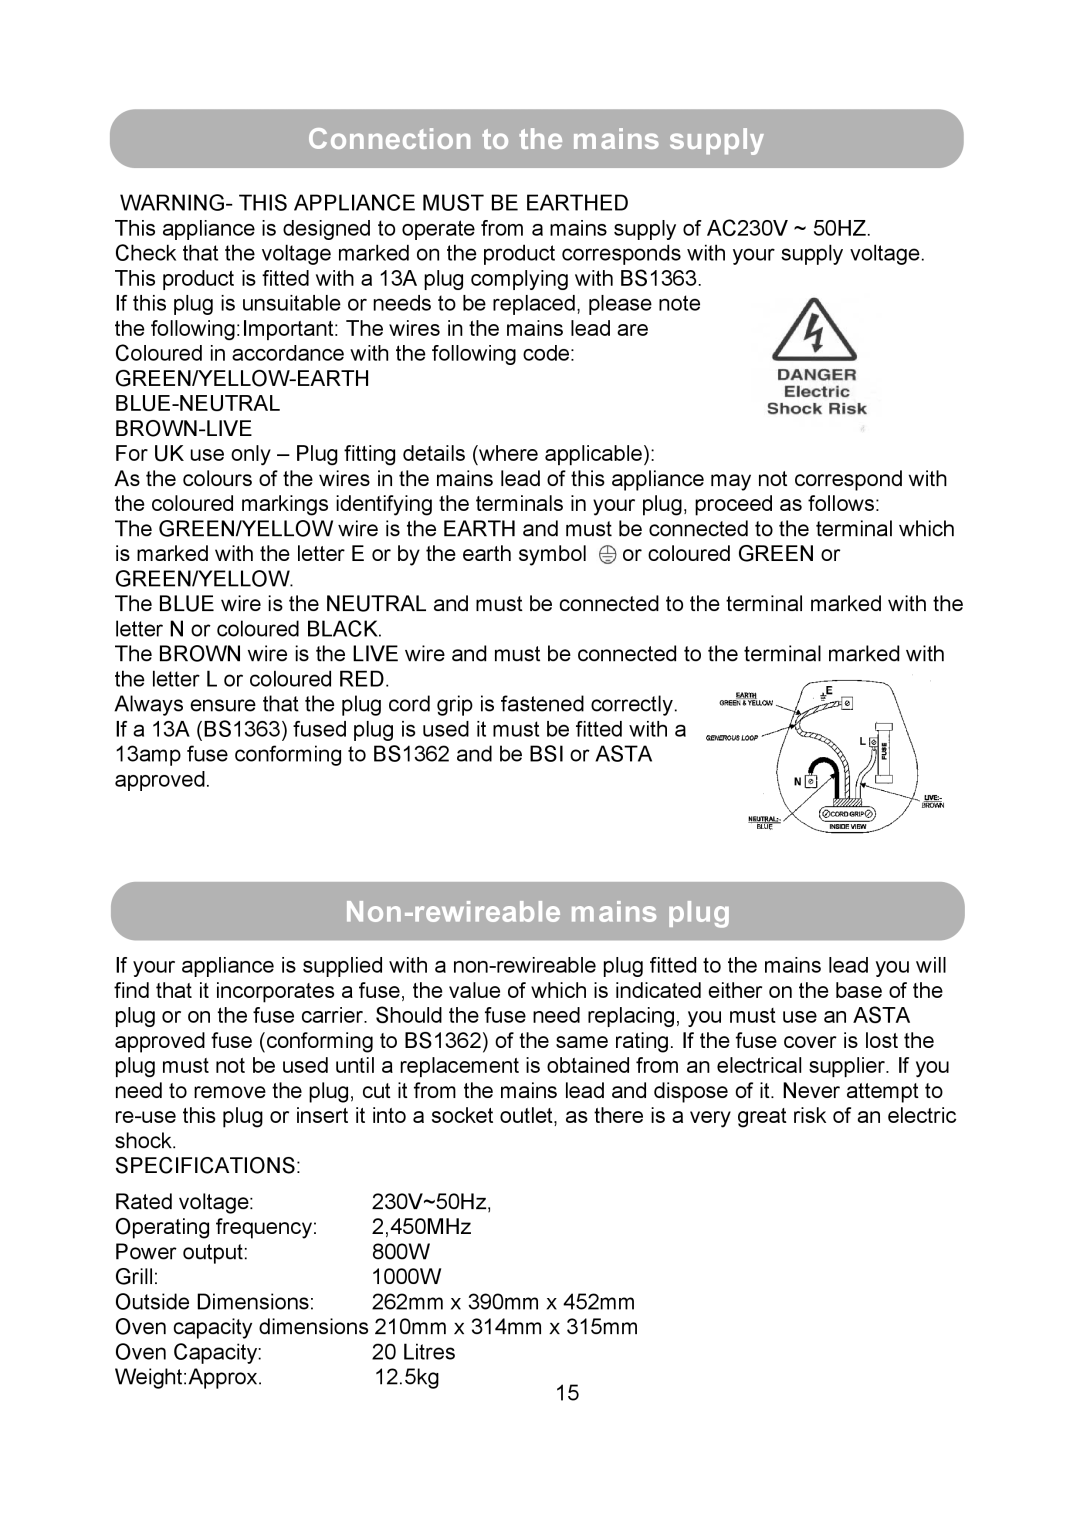 Russell Hobbs RHM2010S instruction manual Connection to the mains supply, Non-rewireablemains plug 